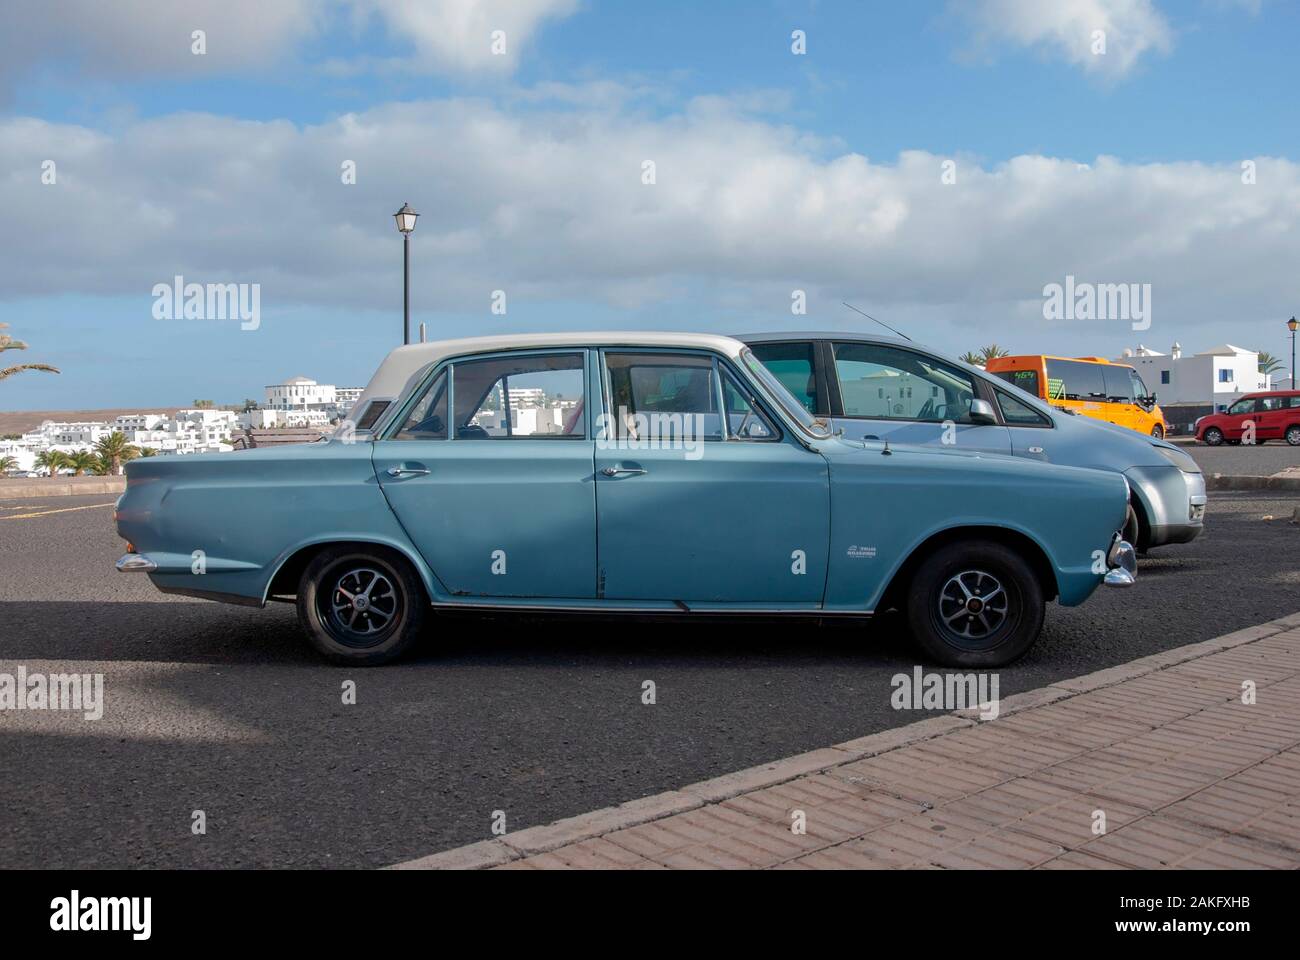 1960's Model Light Blue White Mark One Ford Cortina Motor Car right hand passengers side view of rusty lhd left hand drive four door 4 door ford corti Stock Photo